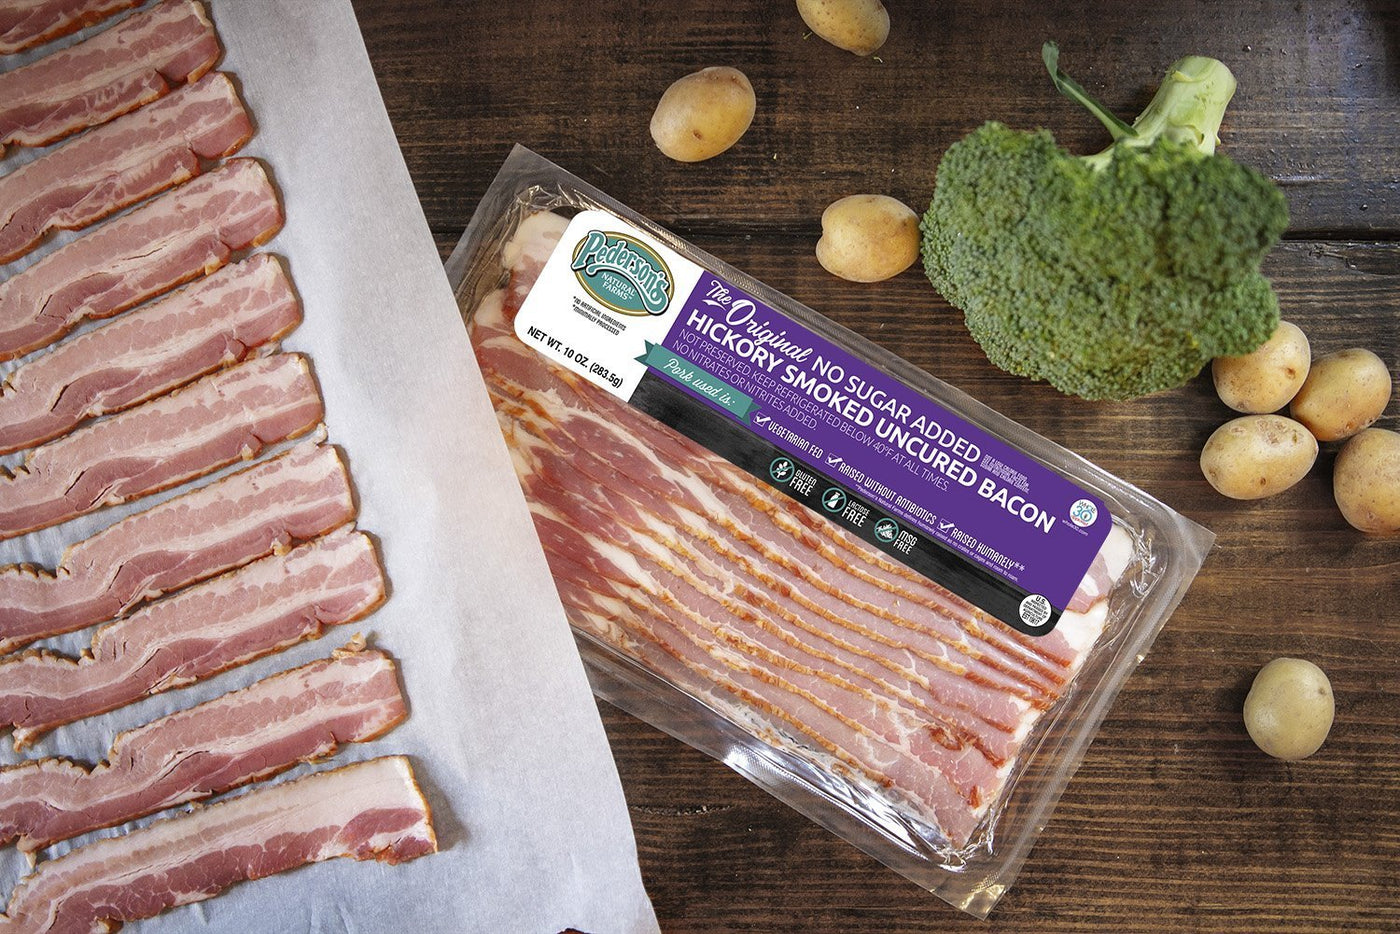 How To Cook Bacon In The Oven | Pederson's Natural Farms